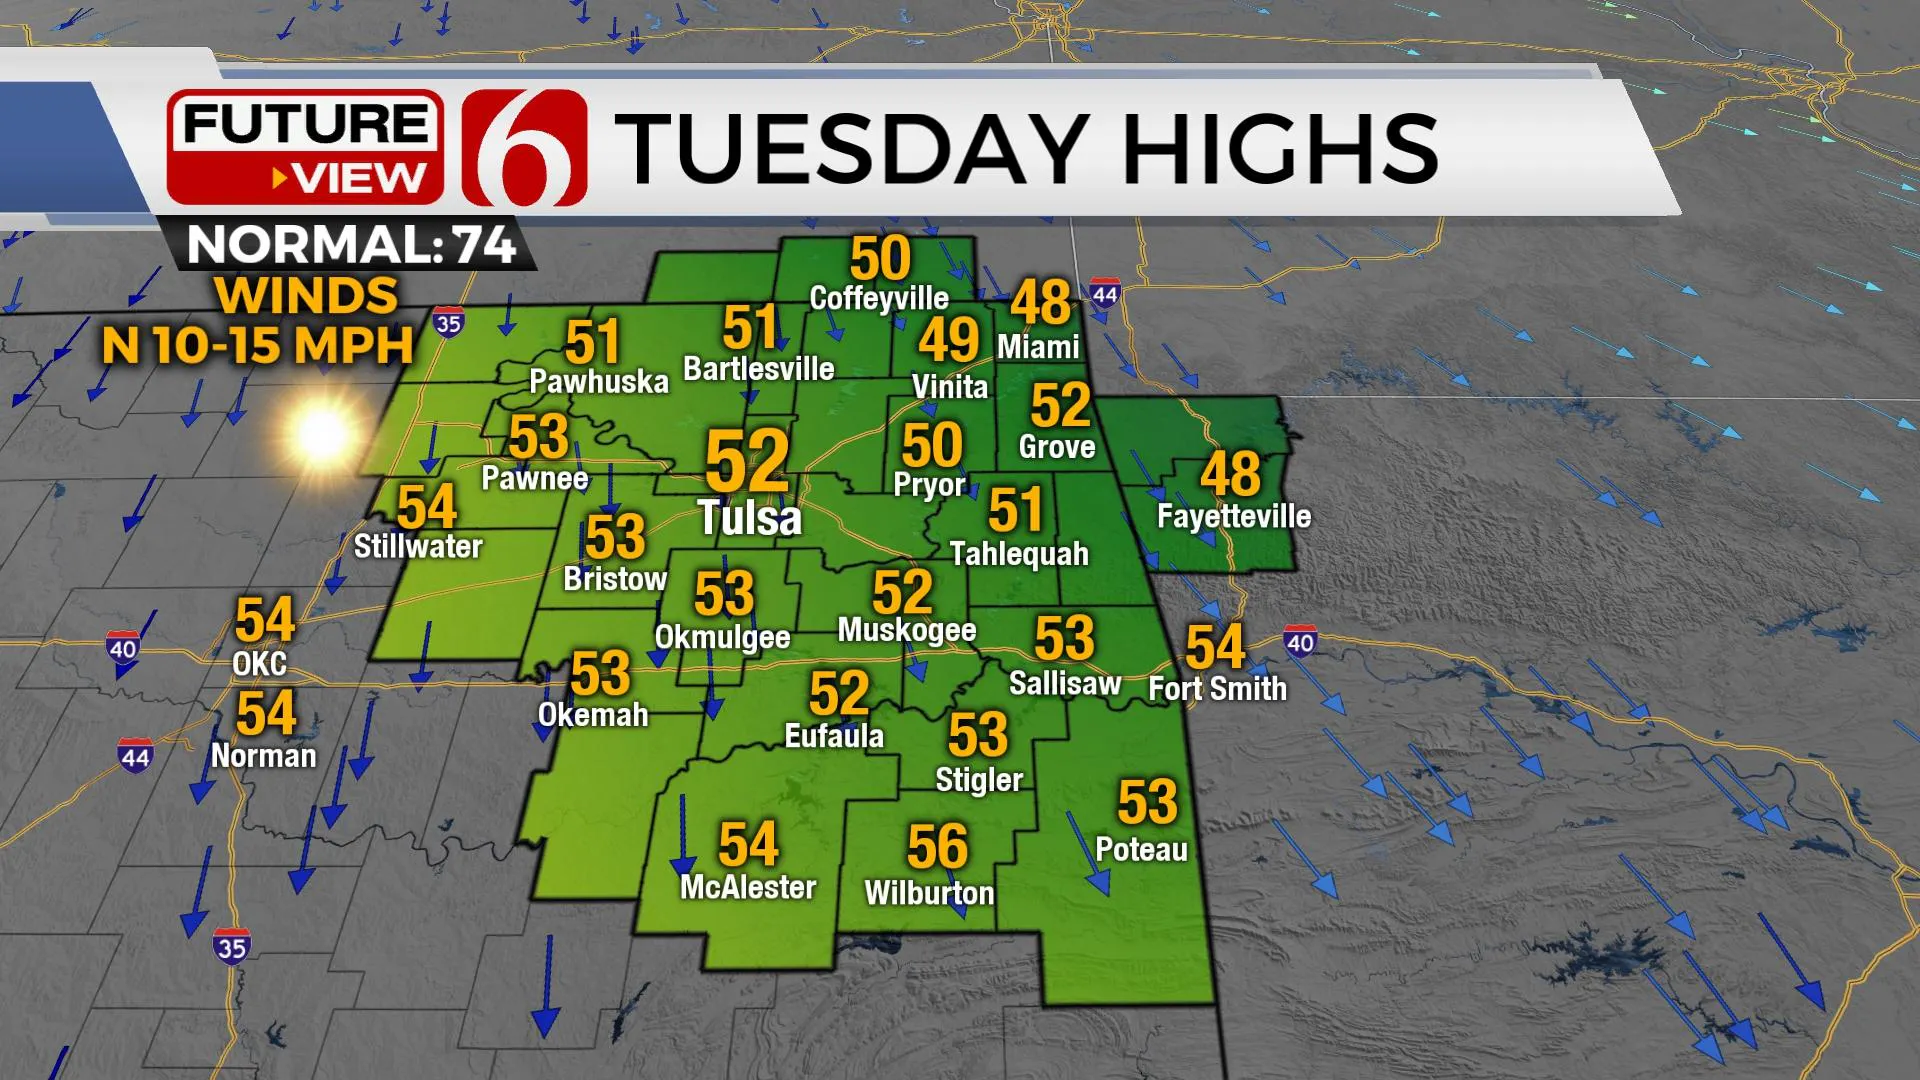 Tuesday highs.